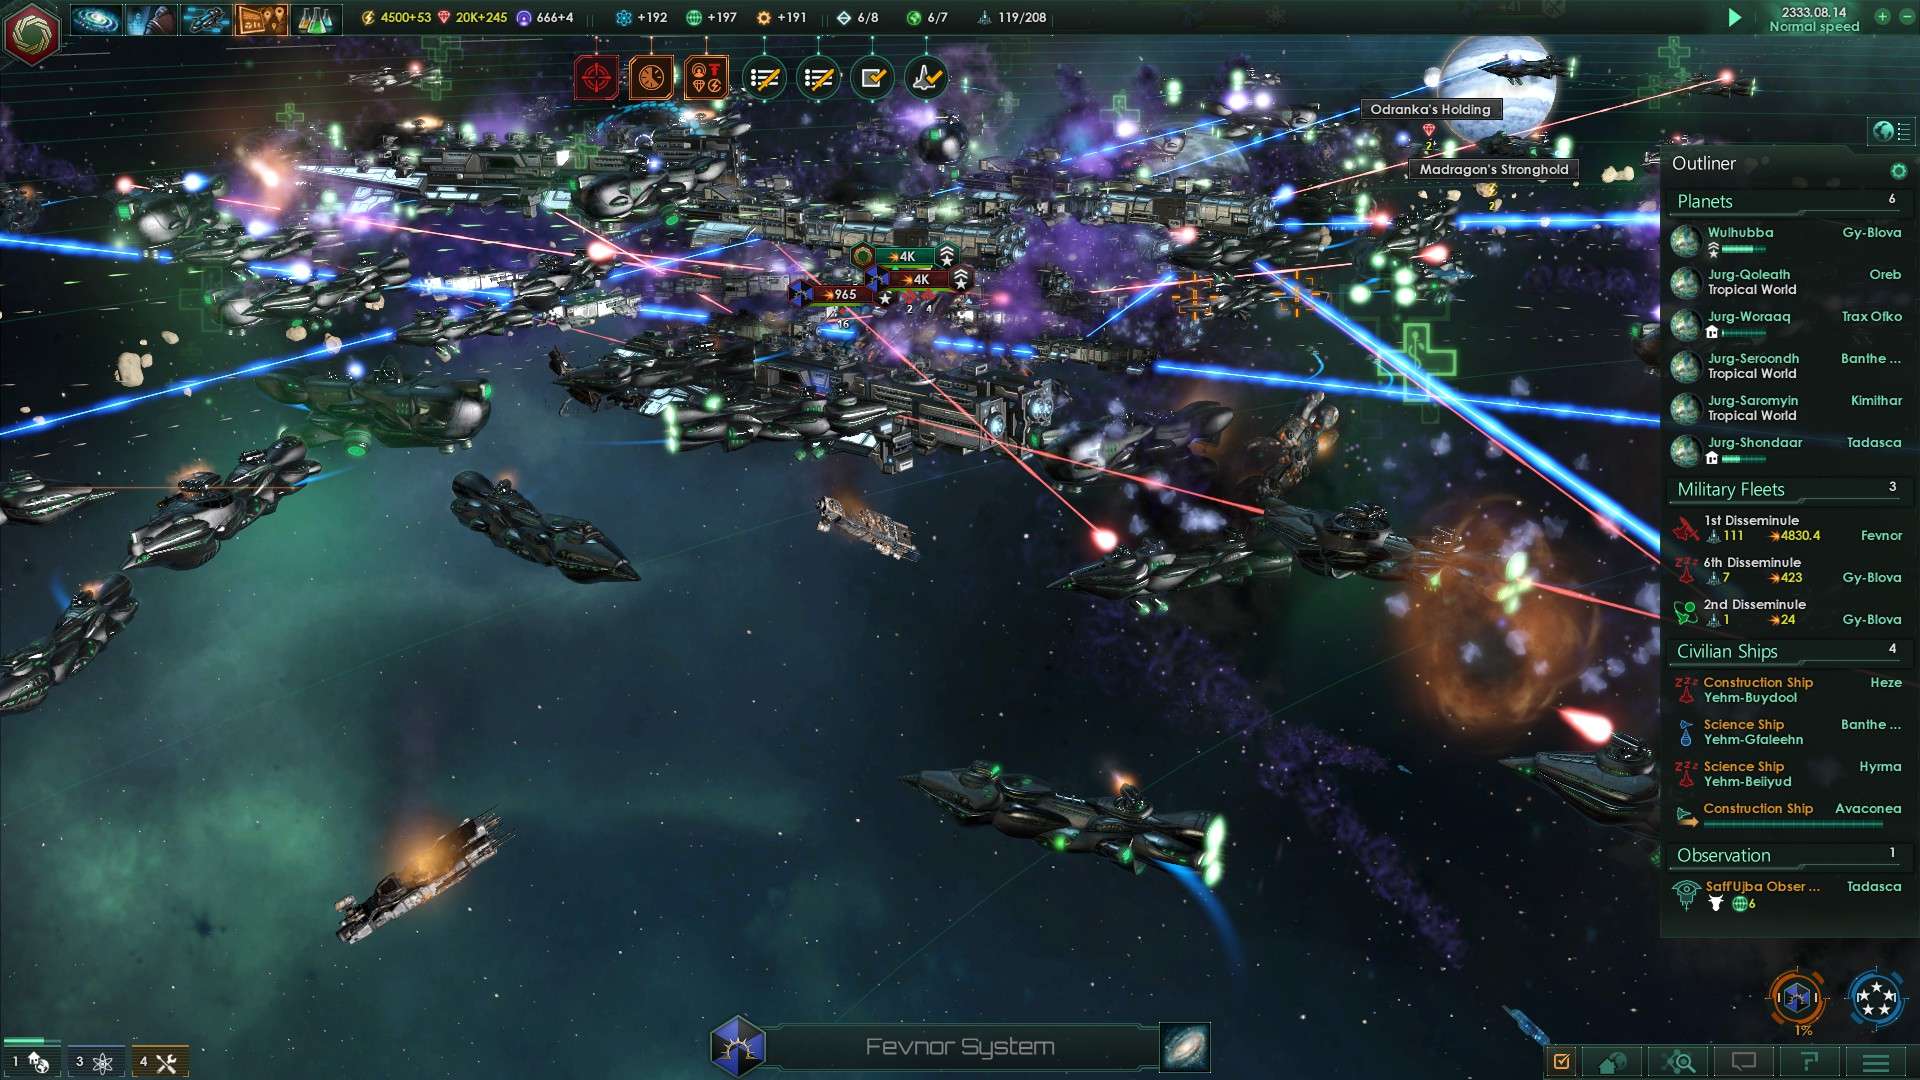 Large fleet battles are pleasingly chaotic – but further diplomatic options would be nice.